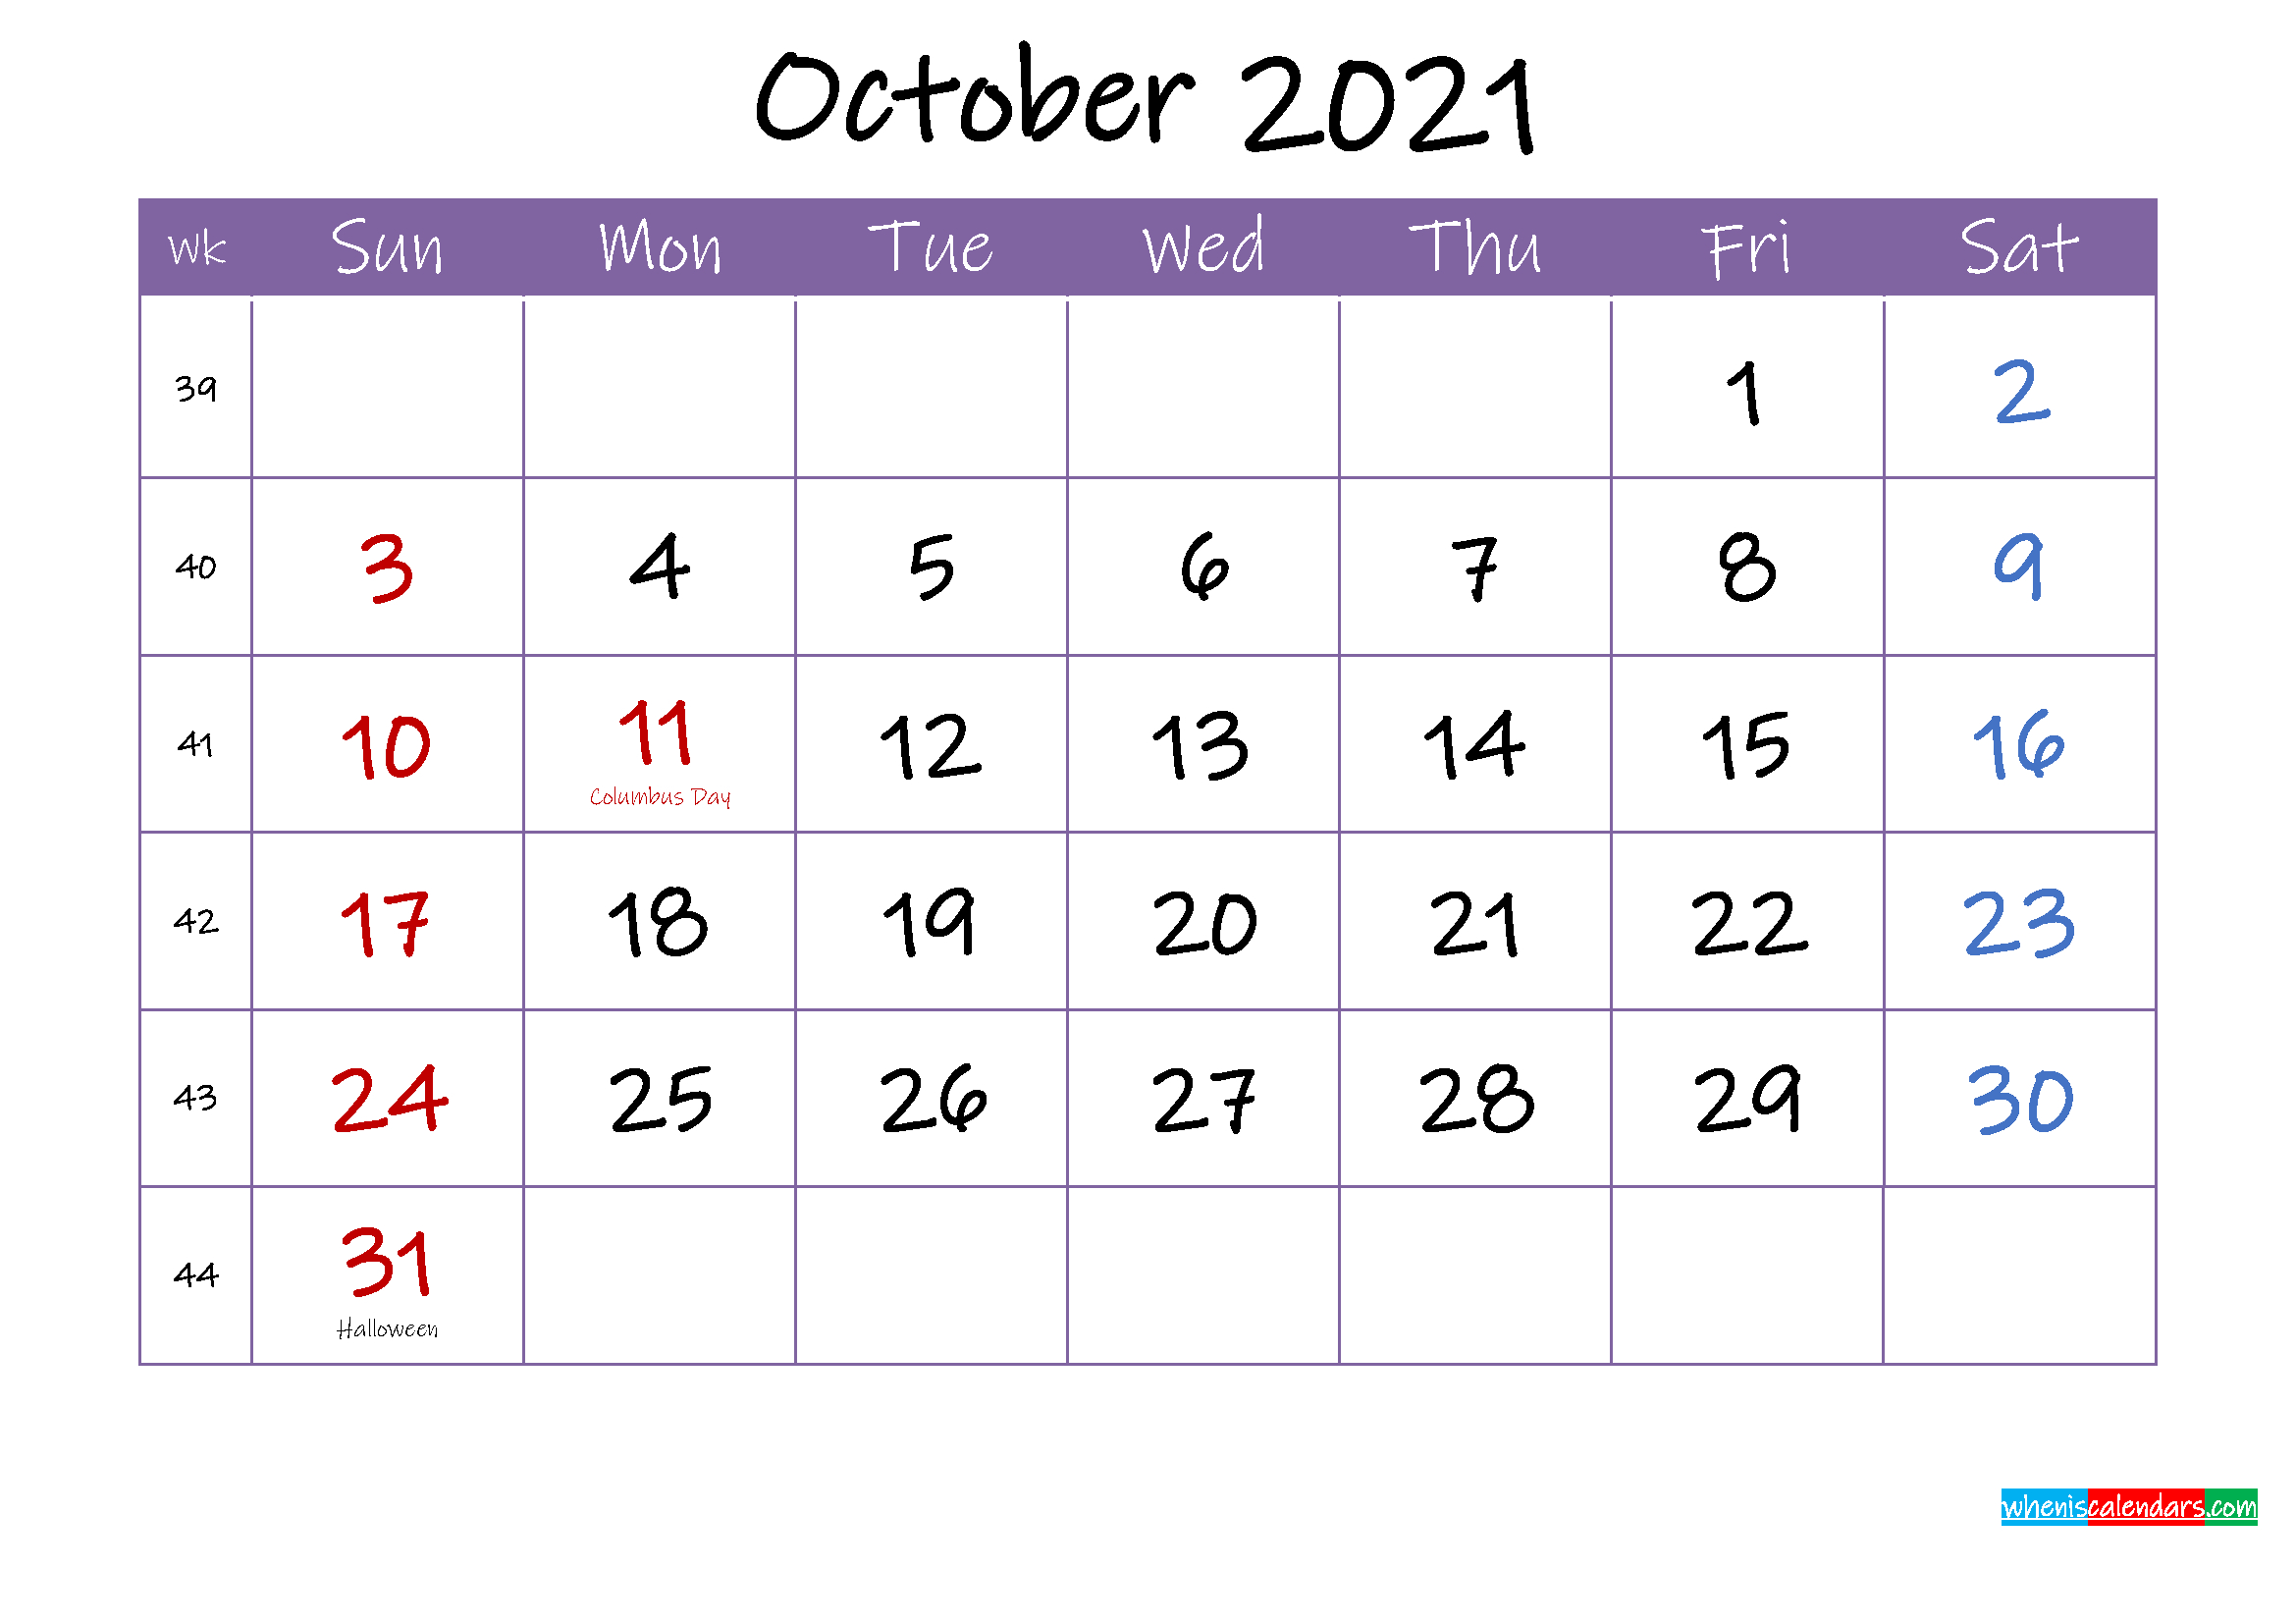 October 2021 Calendar With Holidays Printable - Template